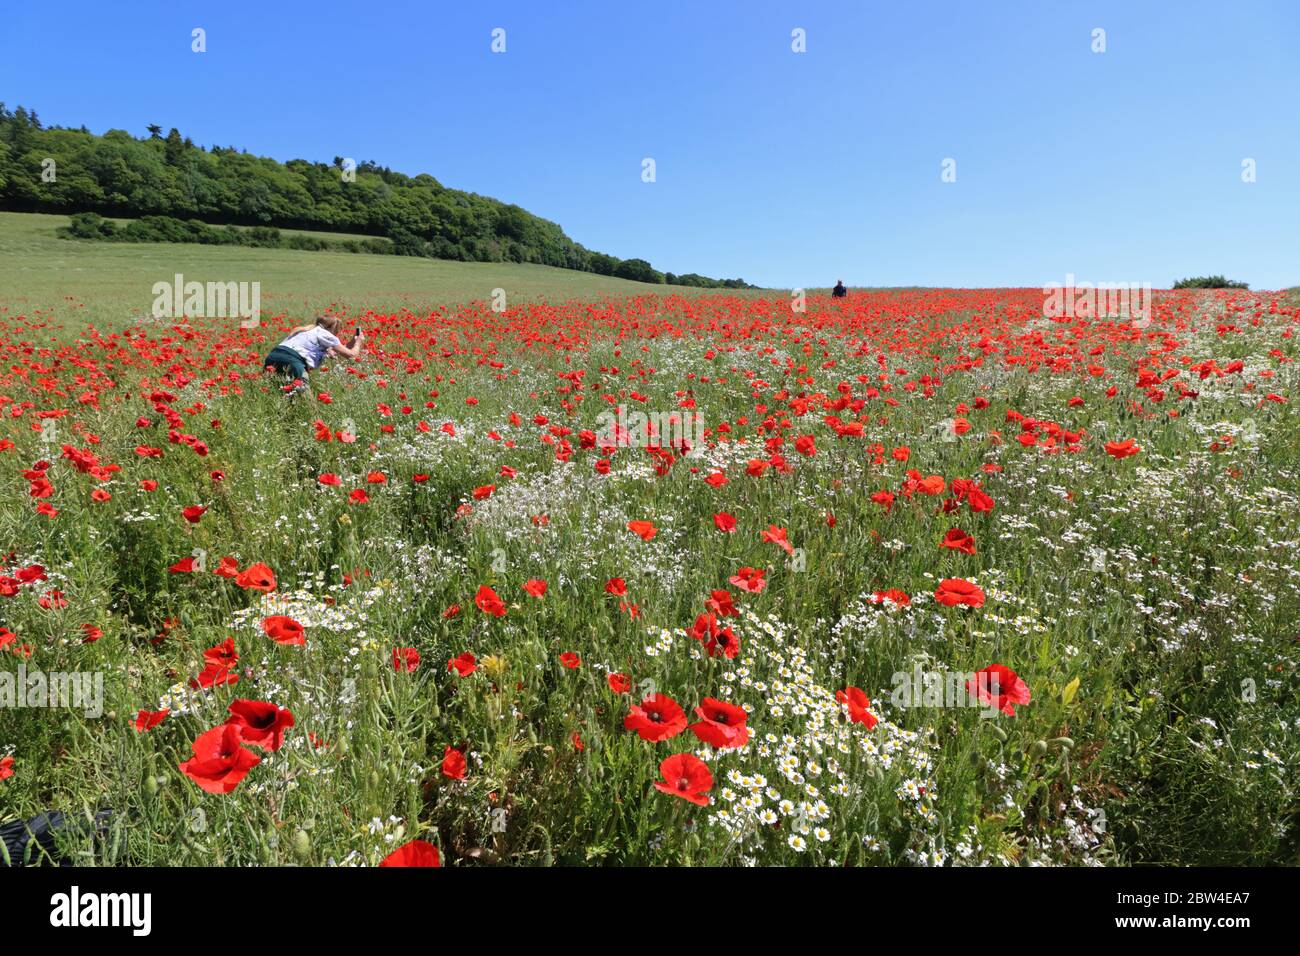 Guildford, Surrey, UK. 29th May, 2020. A splash of red in the Surrey countryside. Beautiful poppies give a dazzling display in the warm sunshine near the North Downs at Guildford. Credit: Julia Gavin Stock Photo